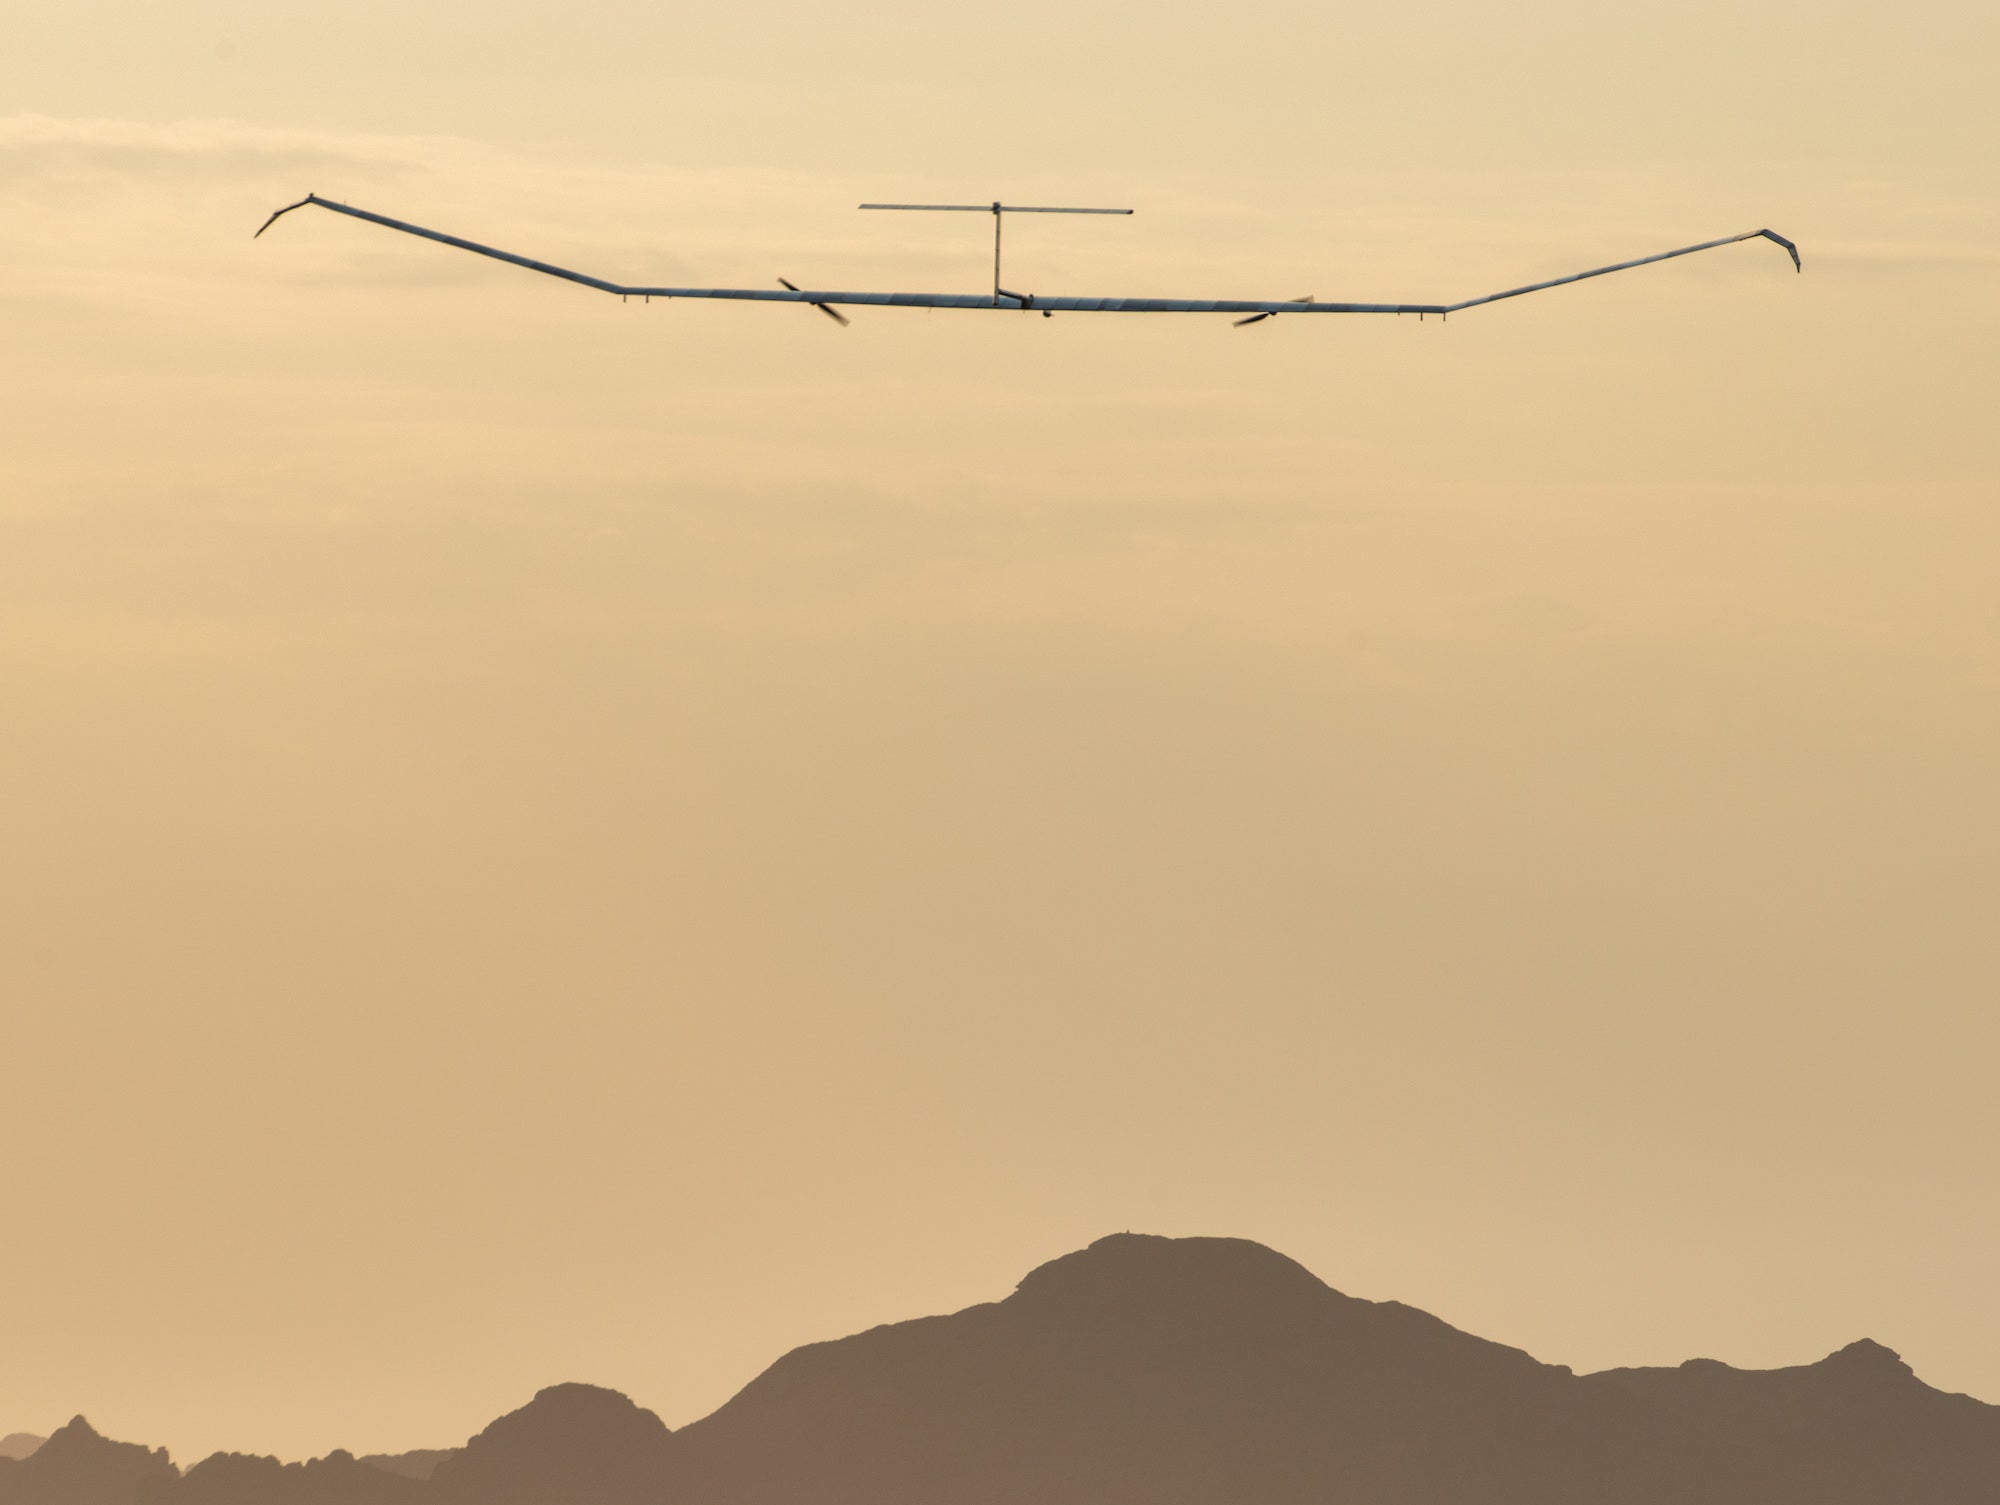 A solar-powered Army drone has been flying for 40 days straight thumbnail